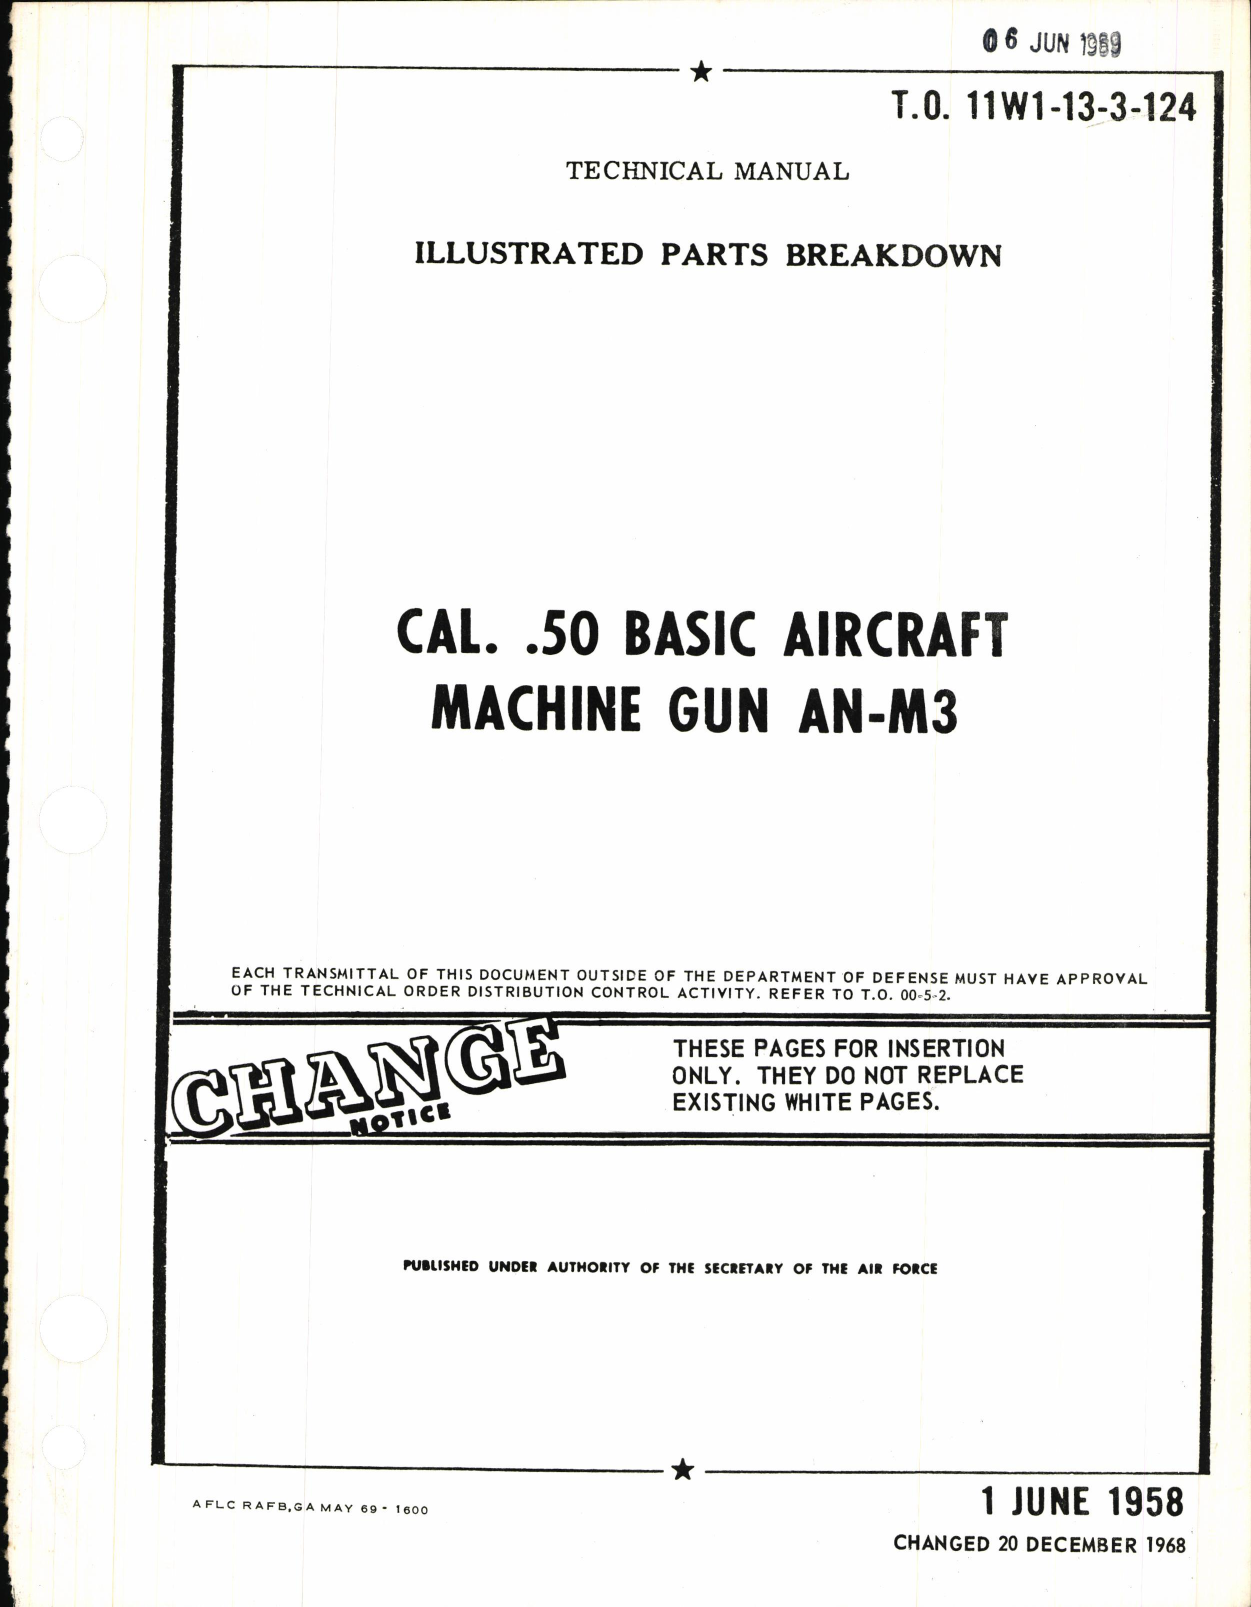 Sample page 5 from AirCorps Library document: Illustrated Parts Breakdown for Cal. .50 Basic Aircraft Machine Gun AN-M3